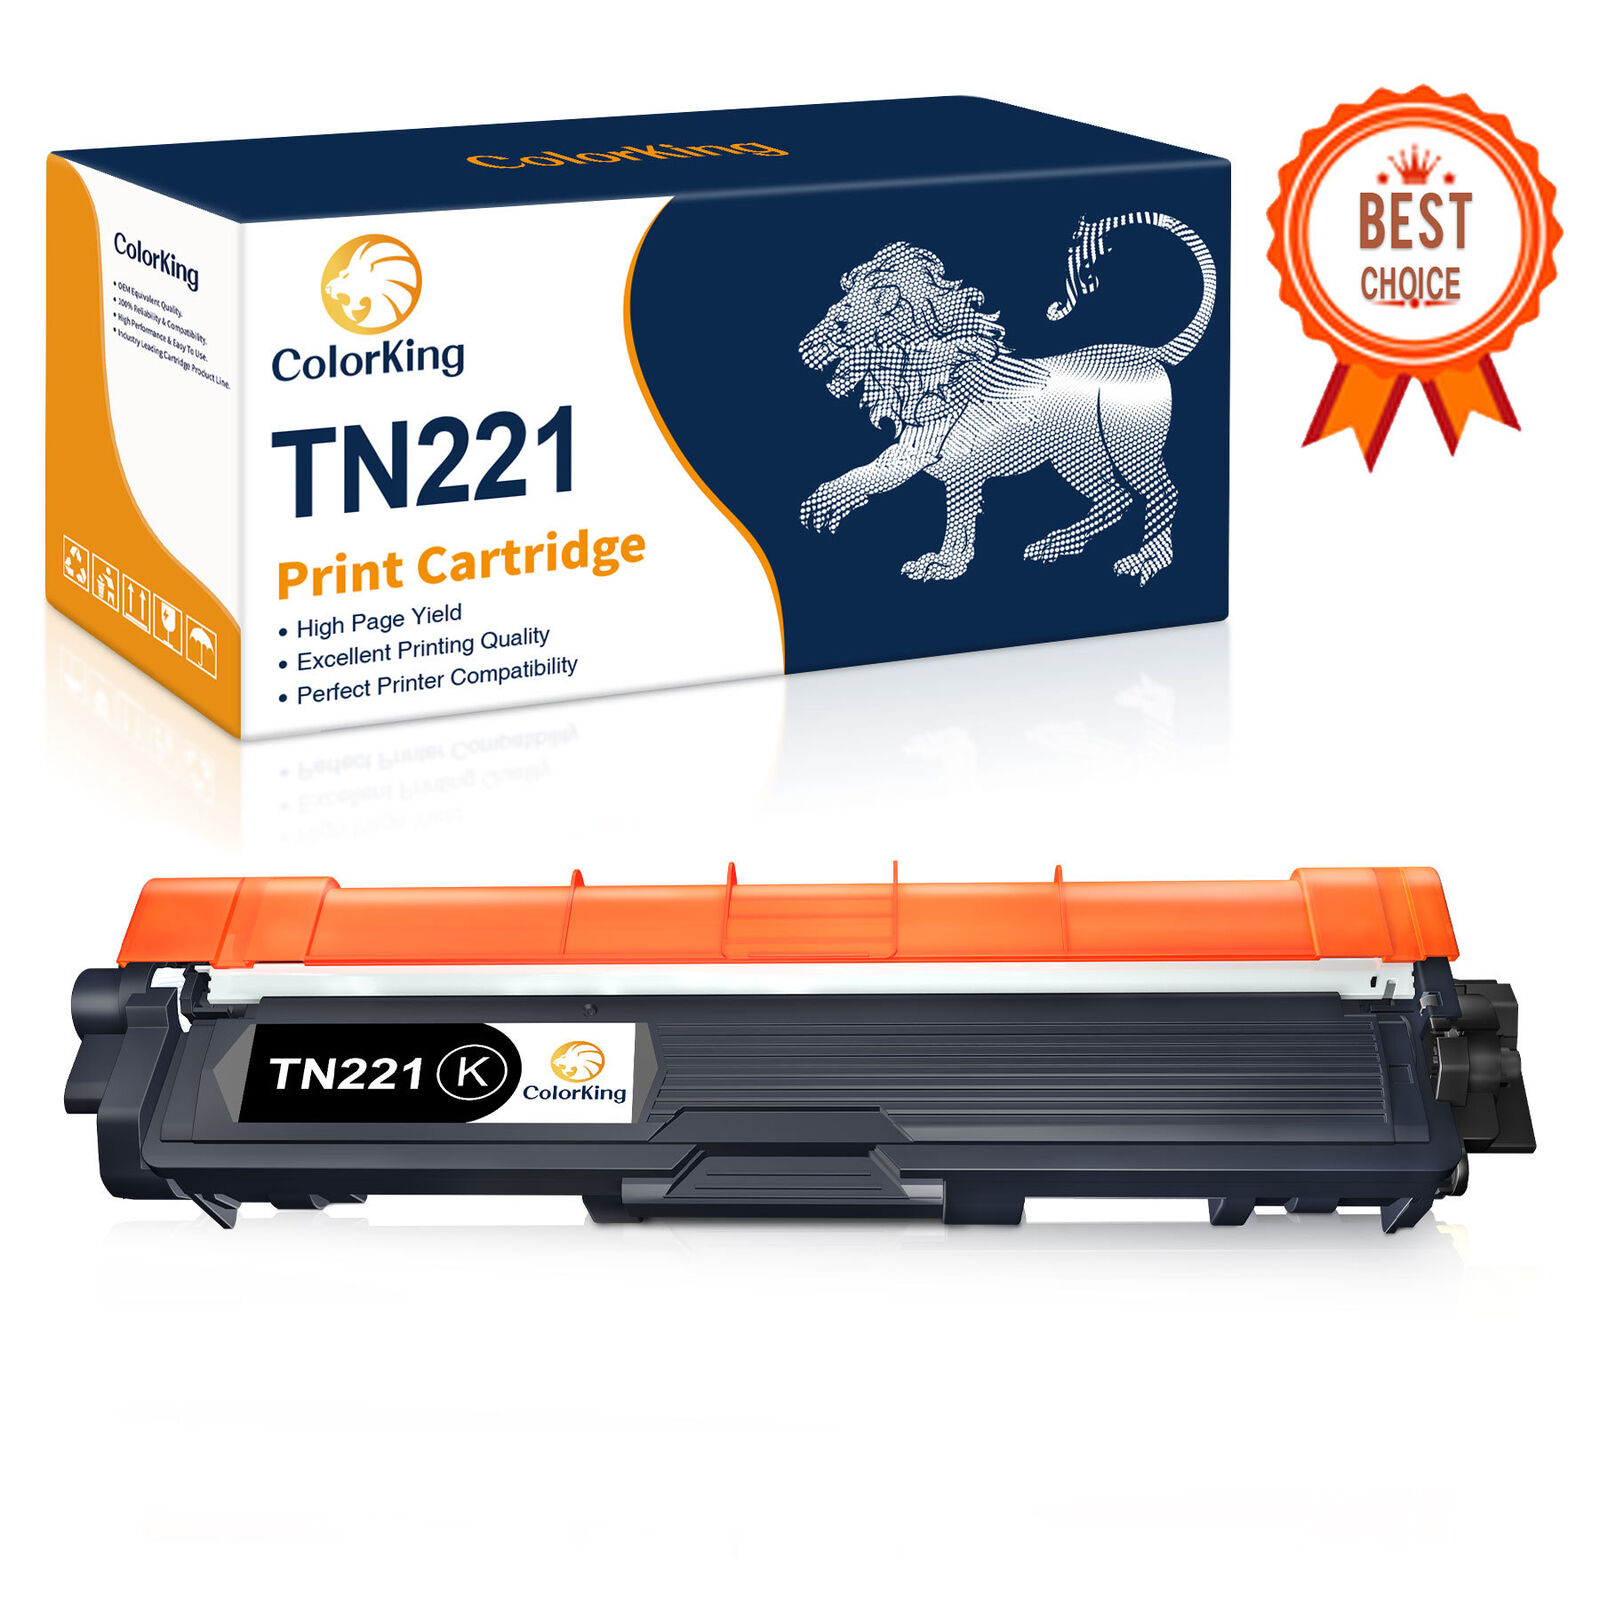 TN221 TN225 BCMY Toner Compatible for Brother MFC-9130CW HL-3140CW HL-3180CDW